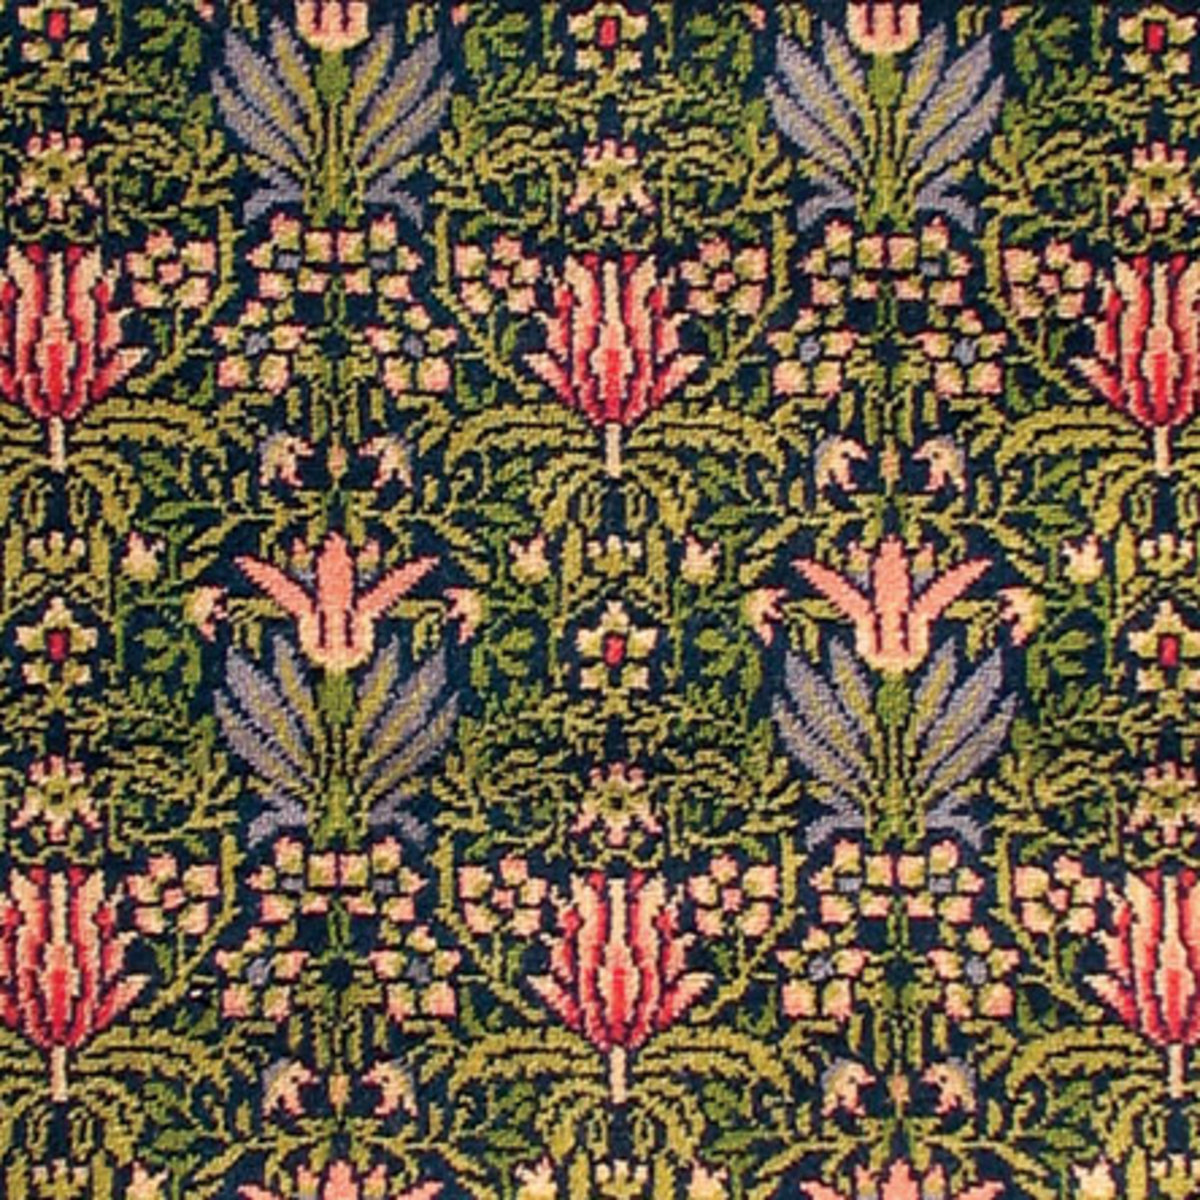 William Morris’s ‘Tulip & Lily’ by J. R. Burrows & Co.